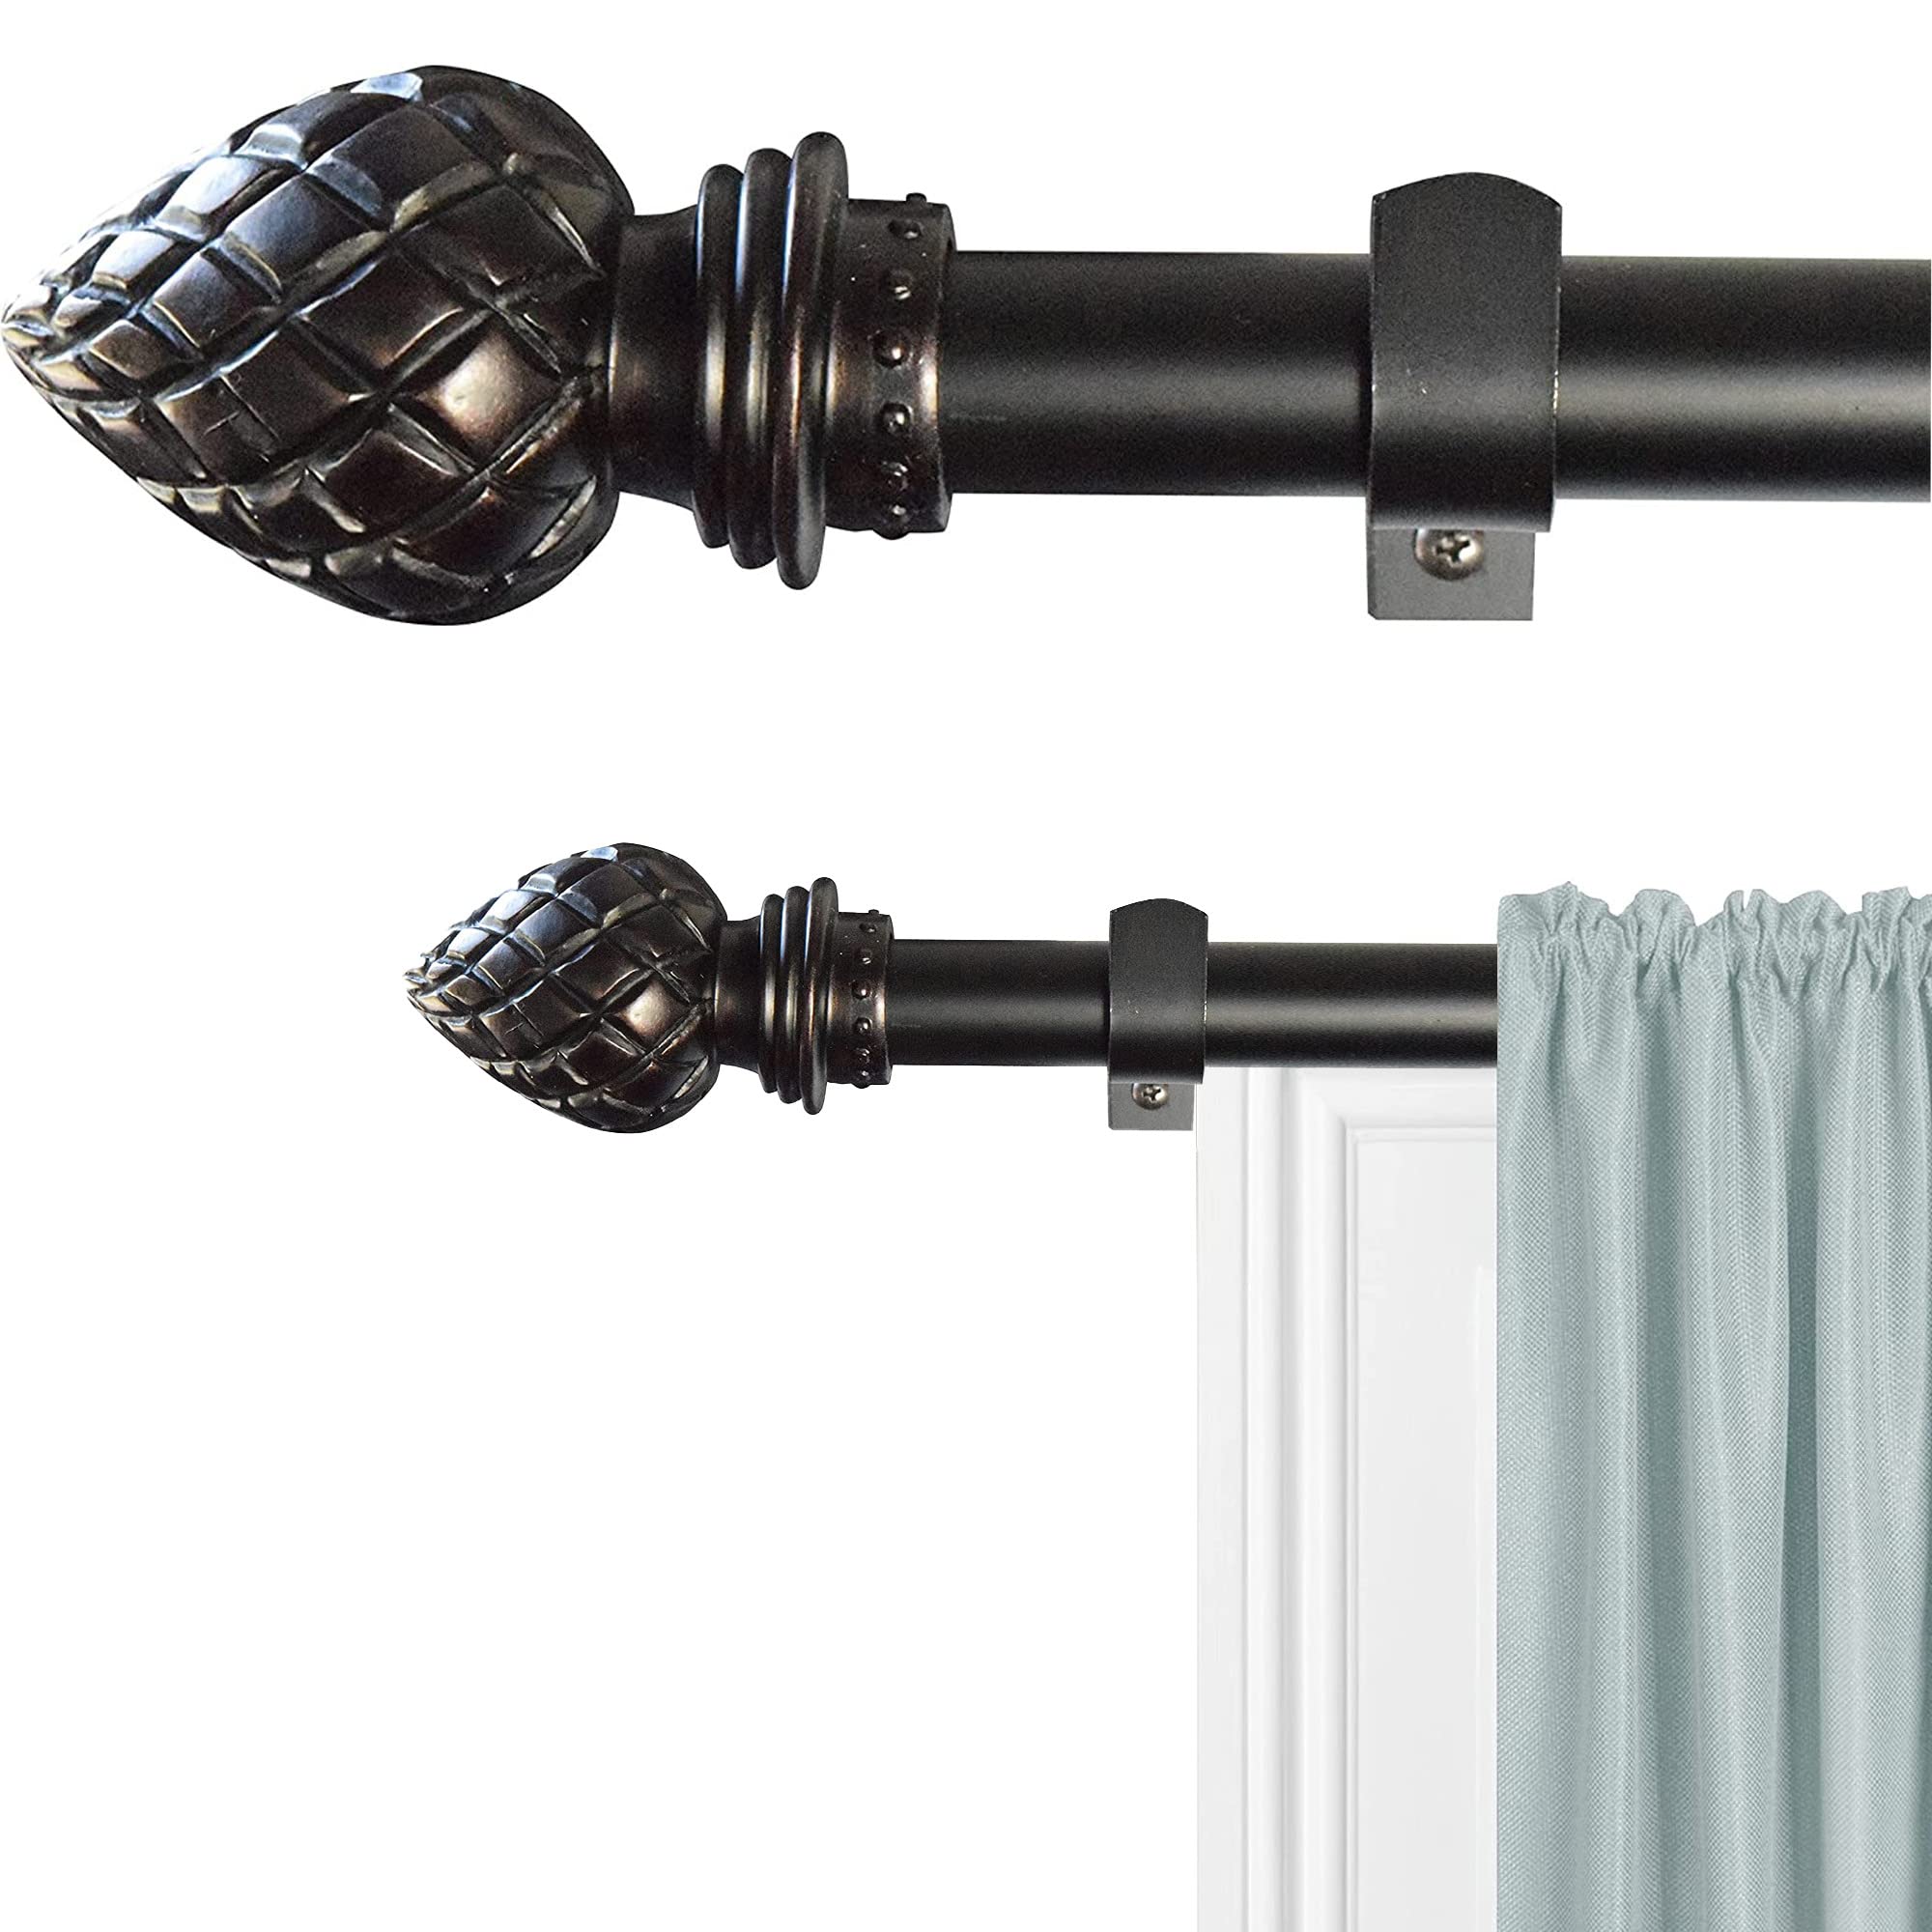 How to Replace Cords on Traverse Curtain Rods from Lowes: A Simple DIY Guide